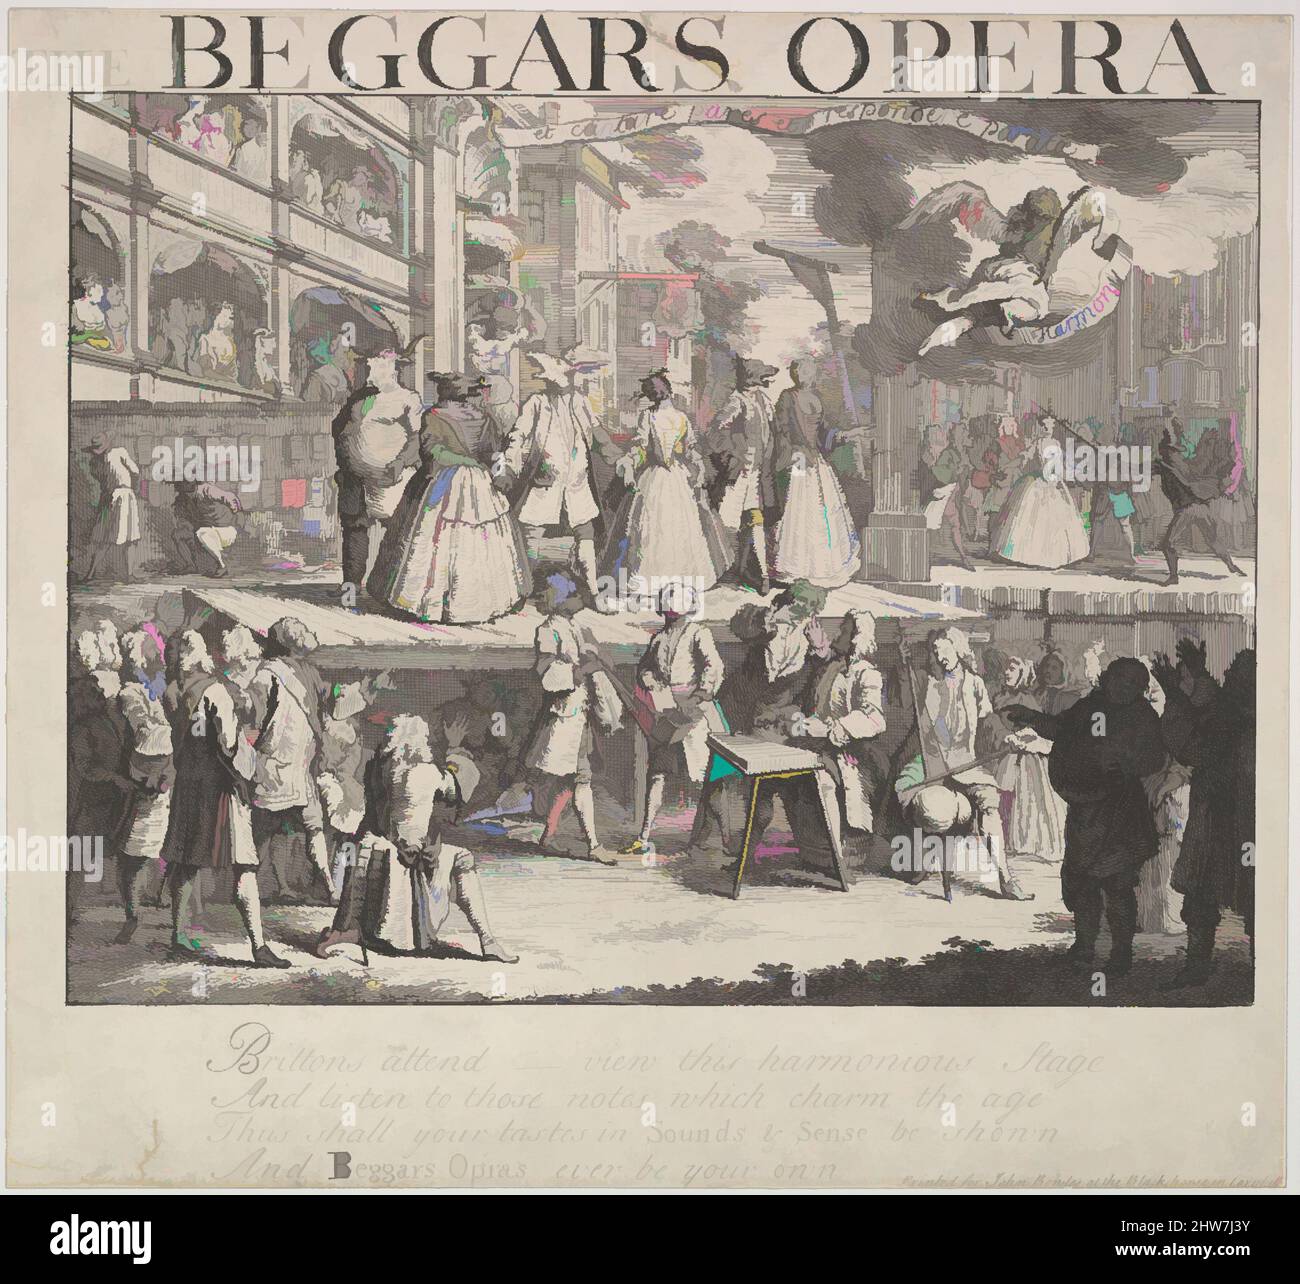 Art inspired by The Beggars Opera, 1728, Etching; sixth state of six, sheet: 9 5/8 x 10 1/2 in. (24.4 x 26.7 cm), Prints, Anonymous, British, 18th century, Formerly attributed to William Hogarth (British, London 1697–1764 London, Classic works modernized by Artotop with a splash of modernity. Shapes, color and value, eye-catching visual impact on art. Emotions through freedom of artworks in a contemporary way. A timeless message pursuing a wildly creative new direction. Artists turning to the digital medium and creating the Artotop NFT Stock Photo